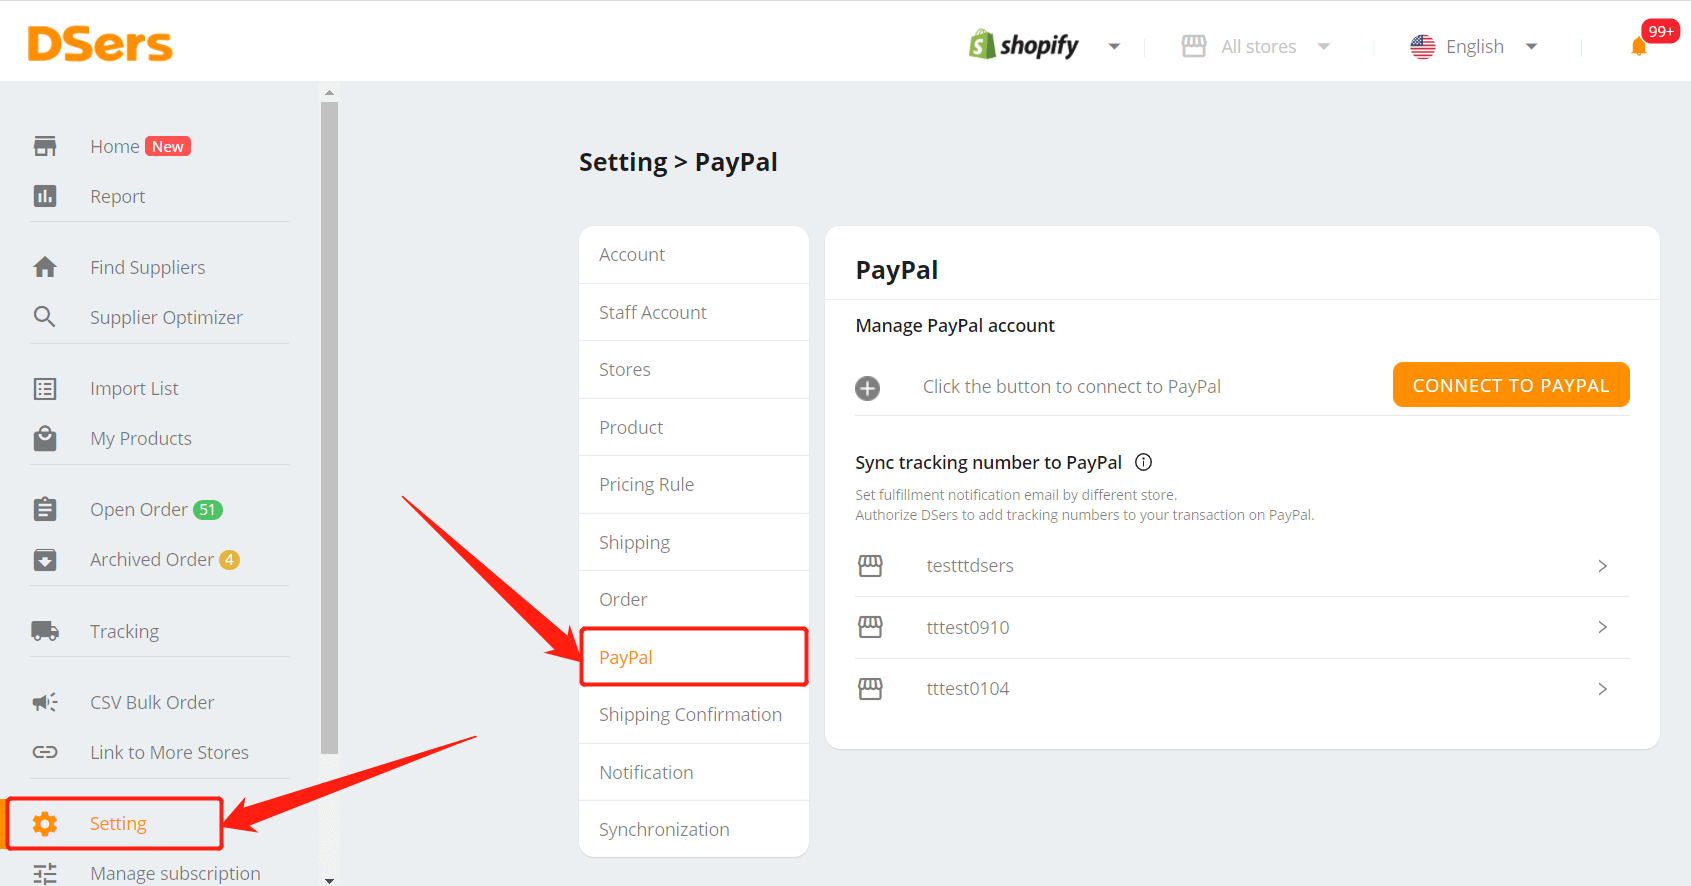 Adding Tracking Number to PayPal - DSers - Setting - Tracking - DSers